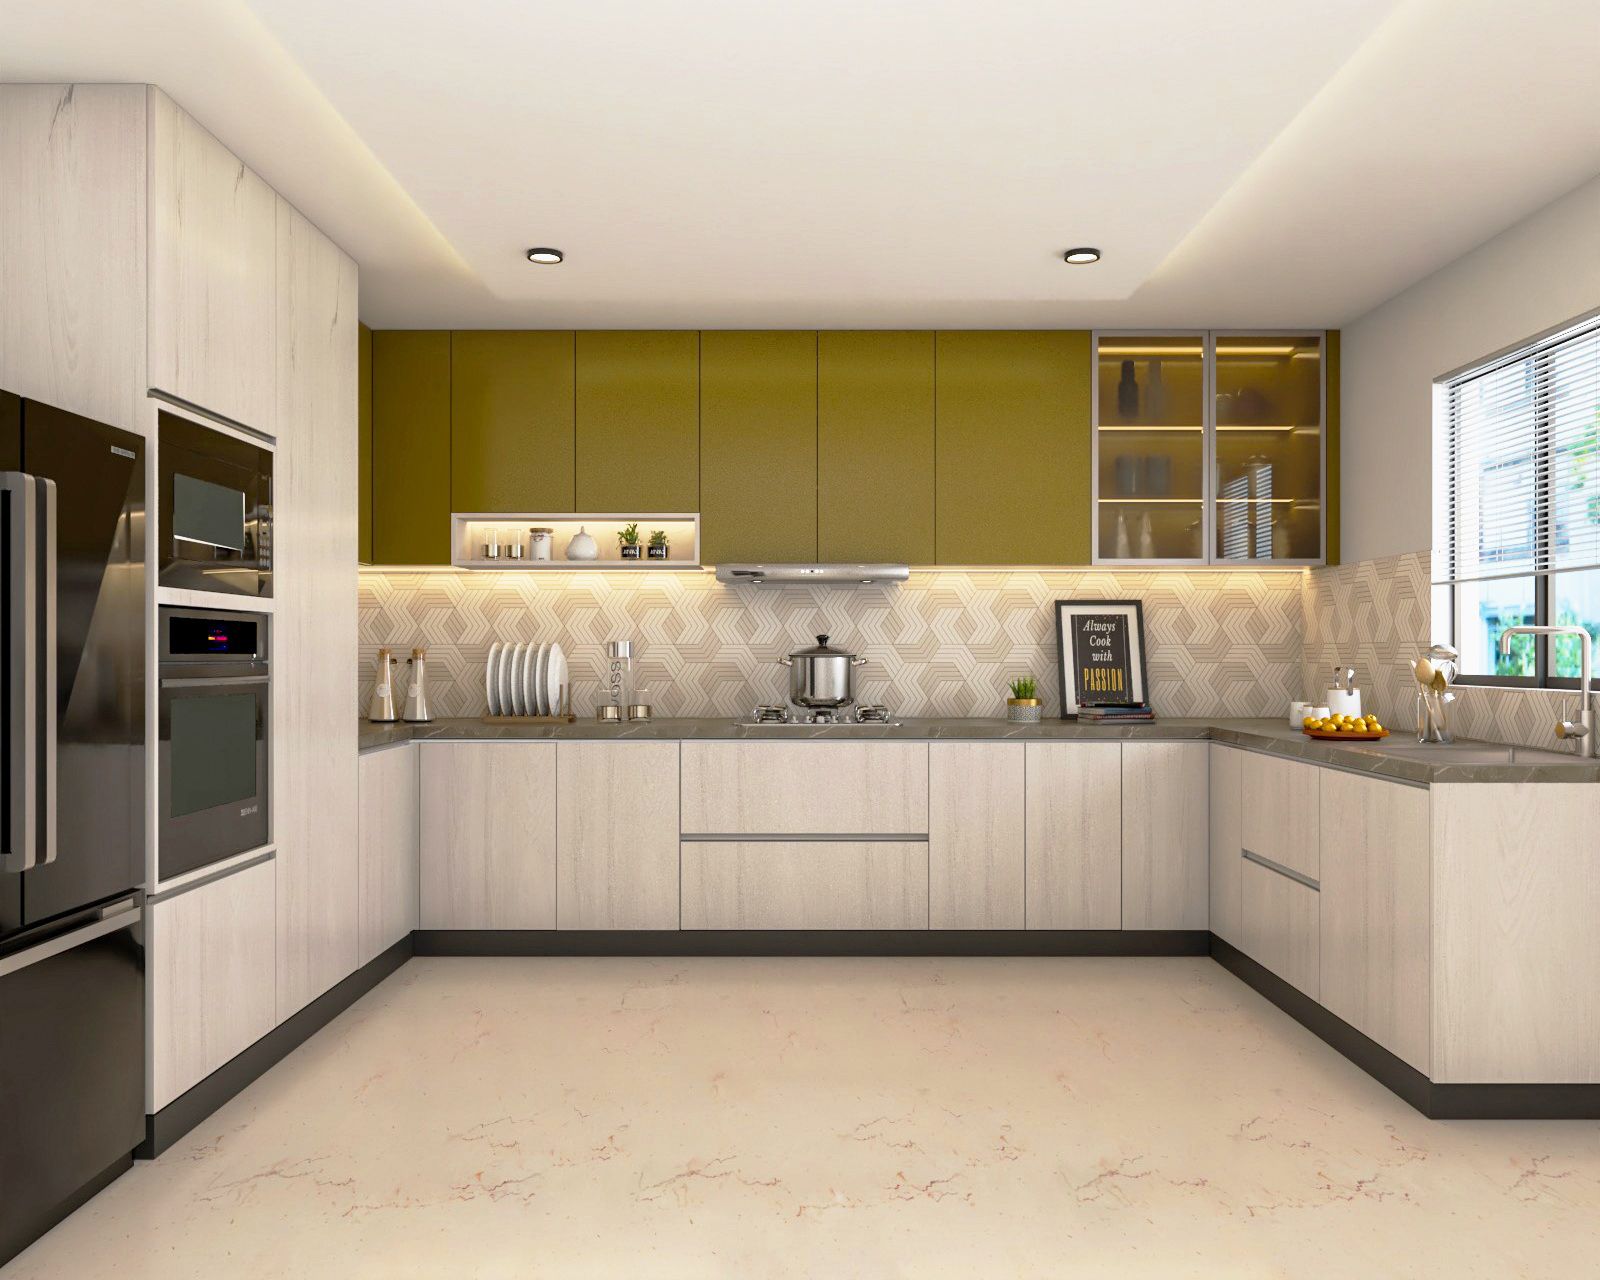 Contemporary Modular Green And Wood U-Shaped Kitchen Design With Abstract Backsplash